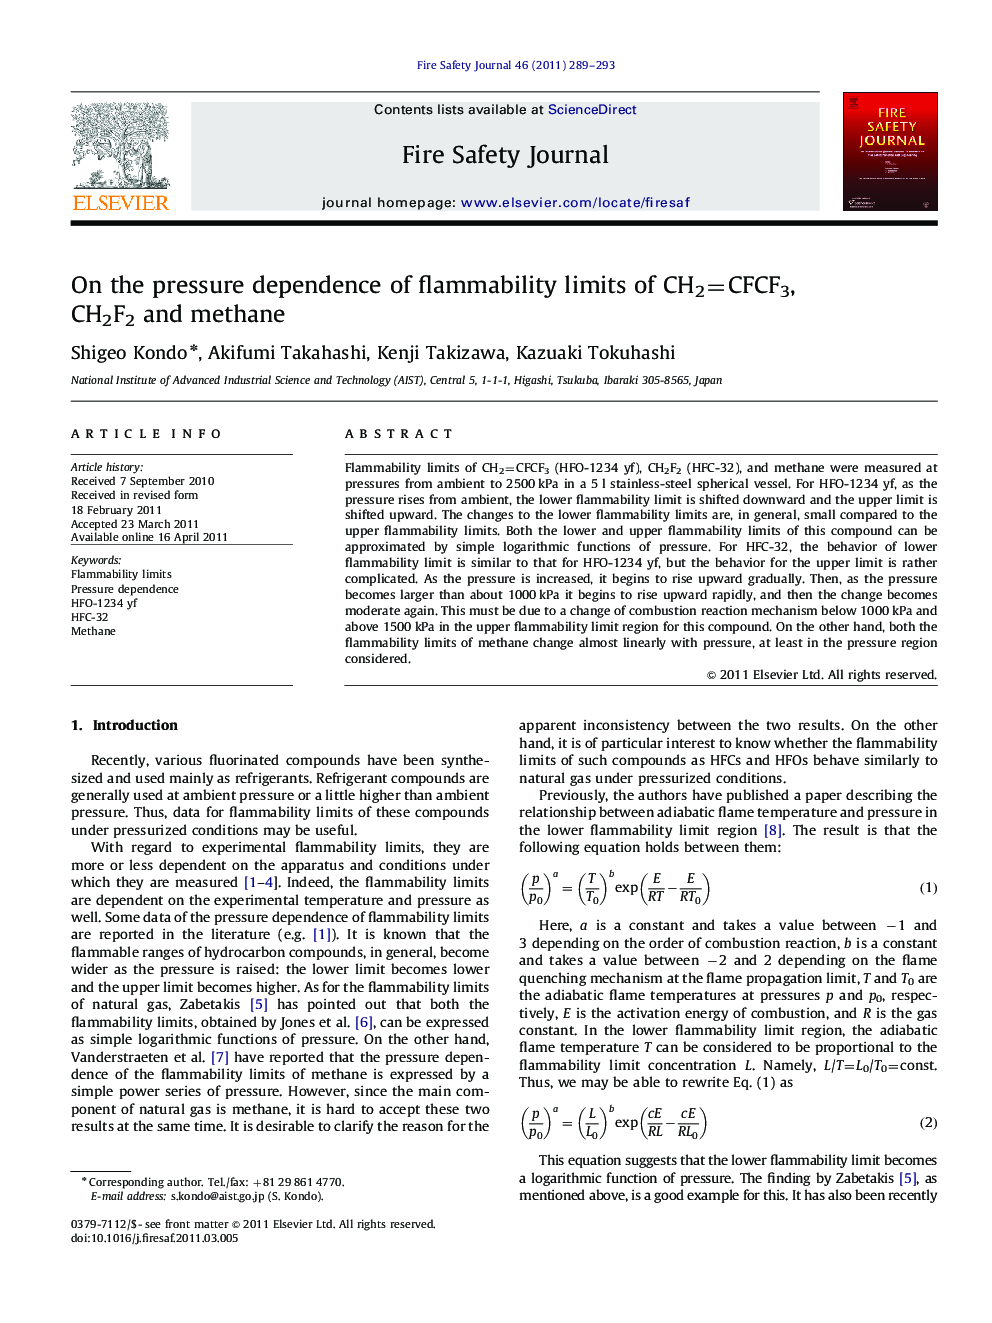 On the pressure dependence of flammability limits of CH2=CFCF3, CH2F2 and methane